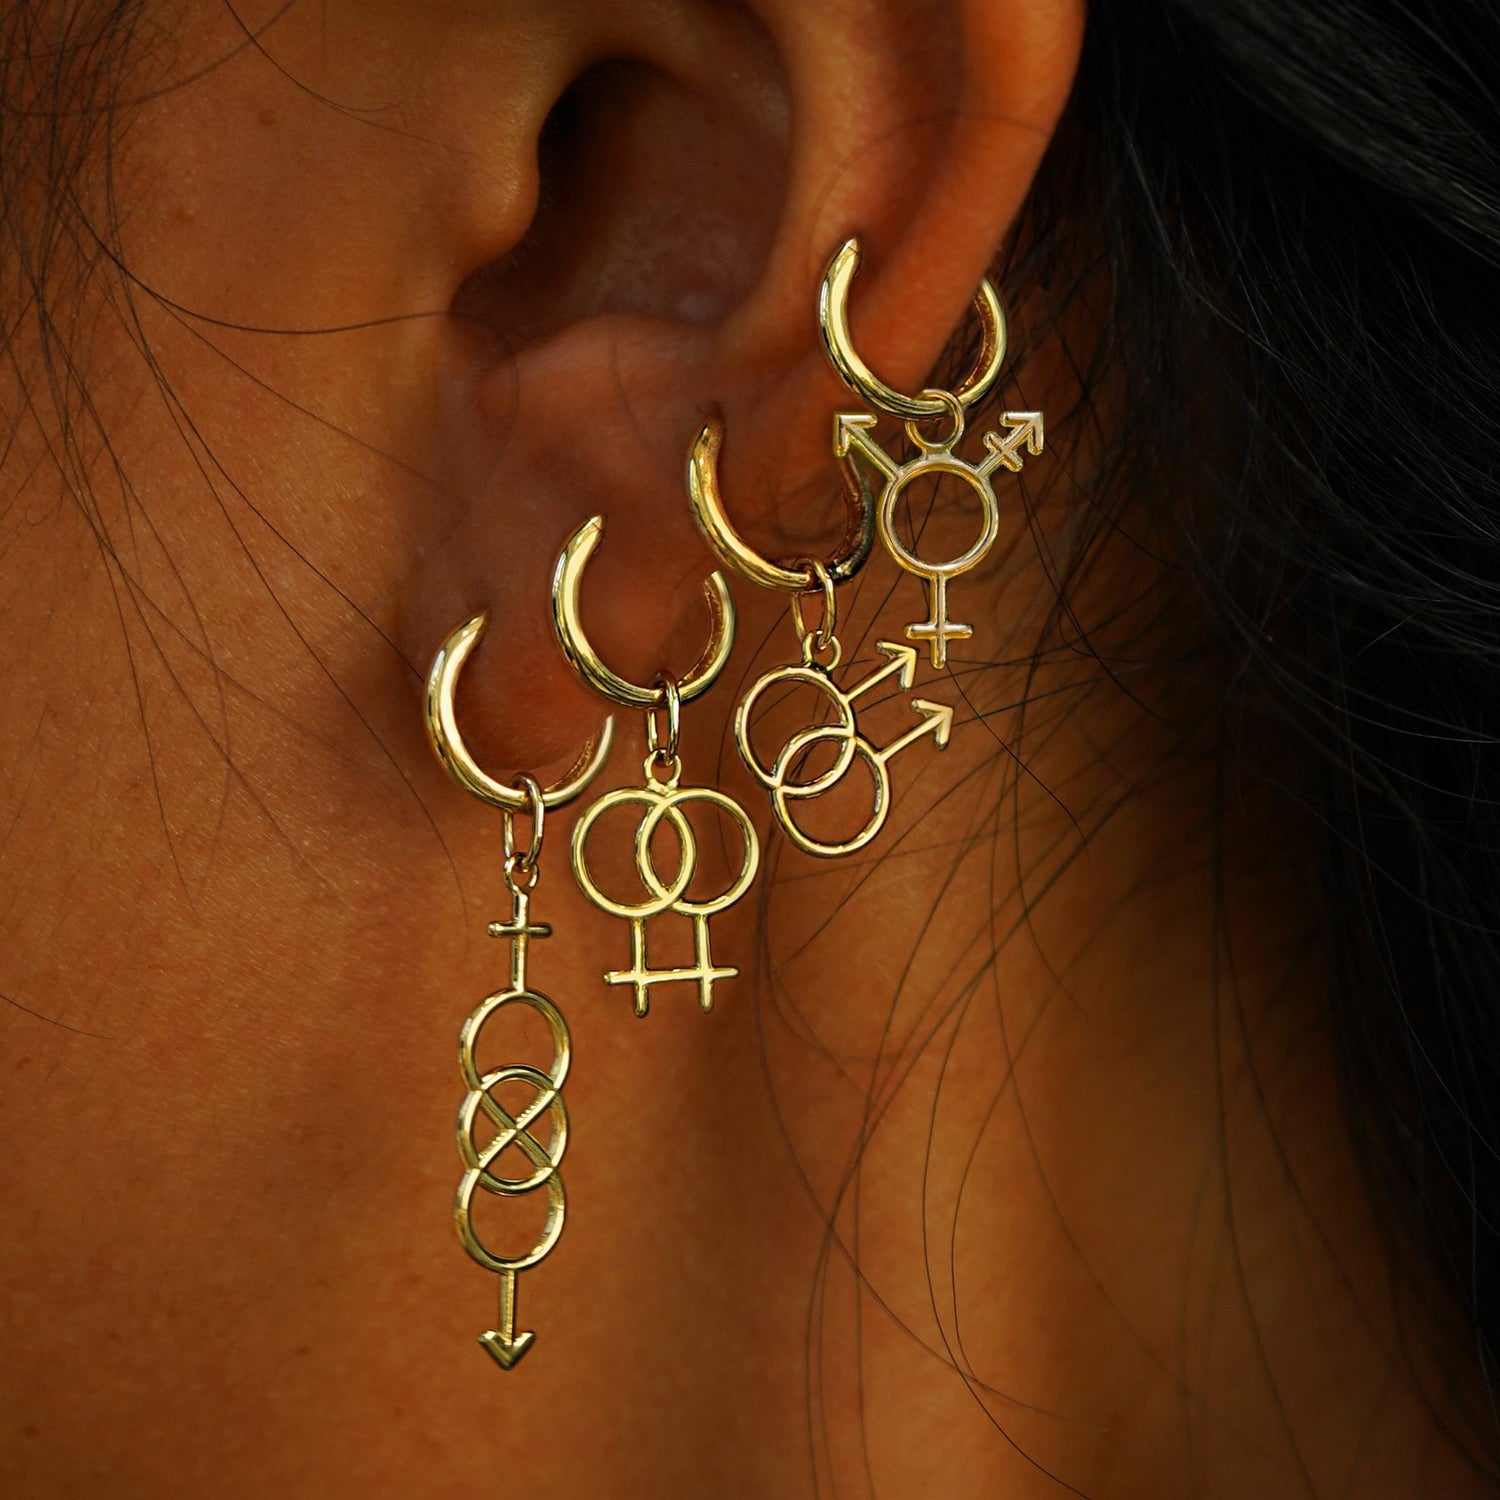 A model's ear wearing yellow gold Bisexual, Lesbian, Gay, and Transgender symbol charms on four Medium Curvy Huggies